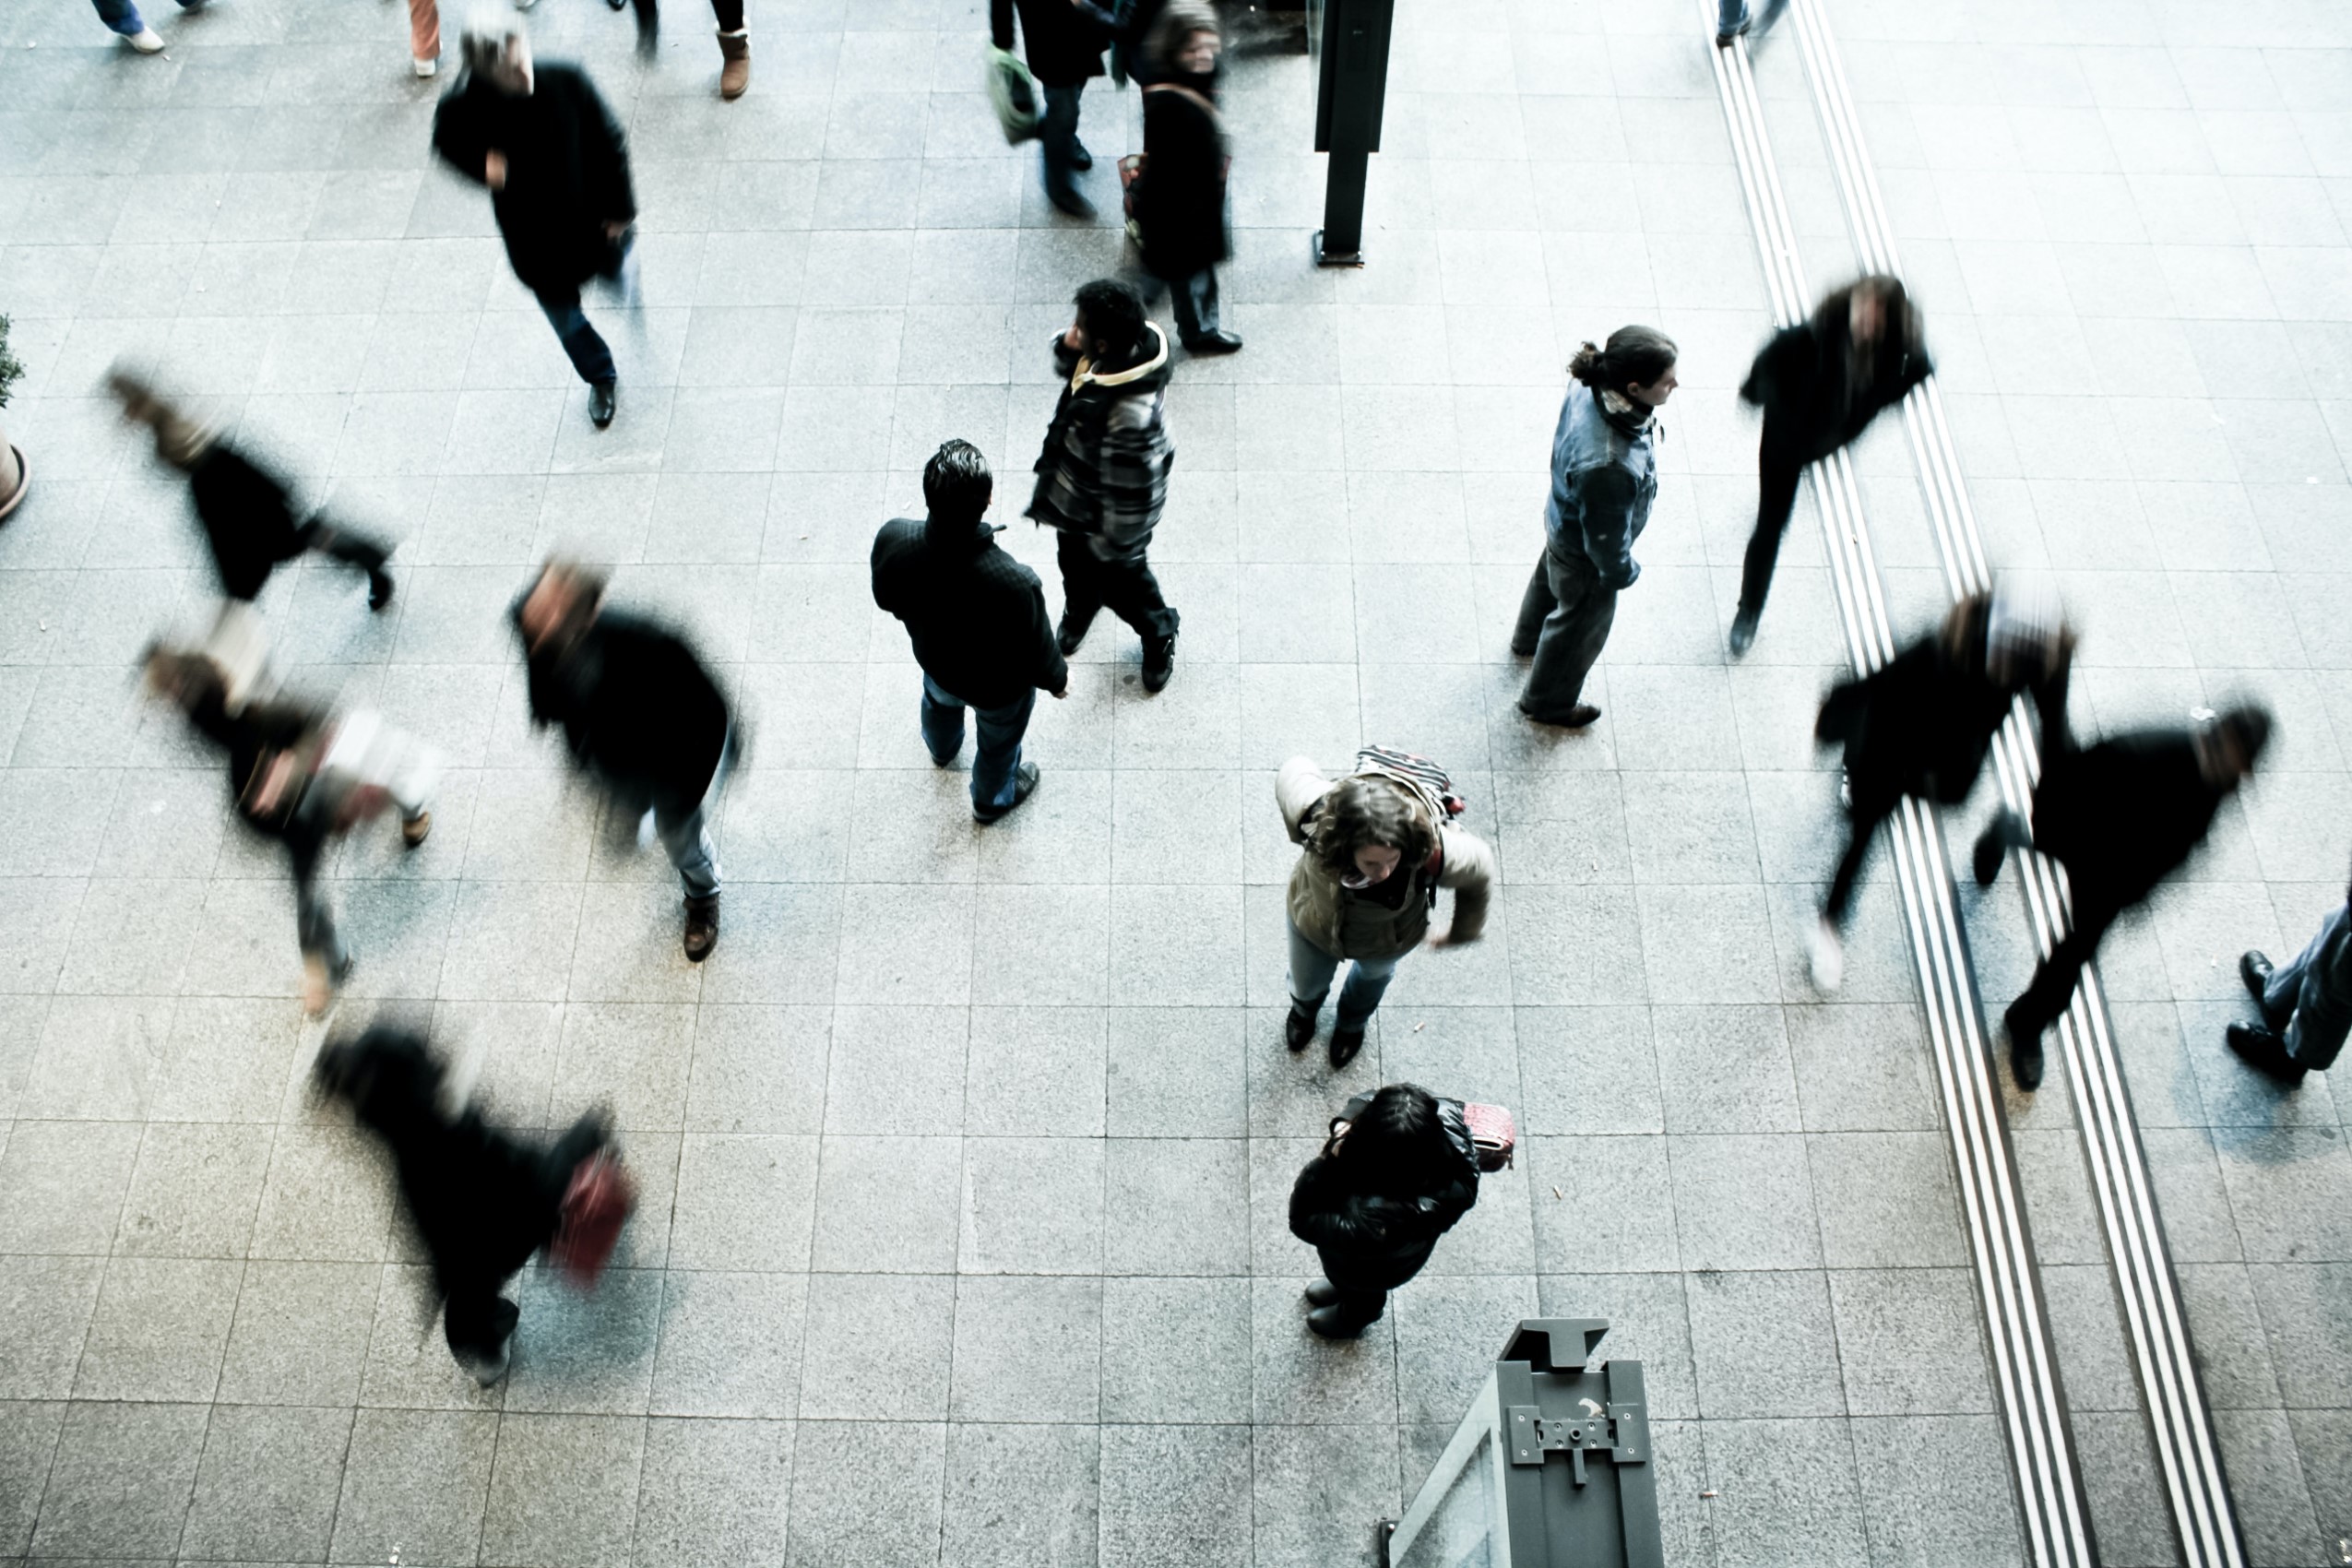 A blurred crows of people walk through a public space like a train station